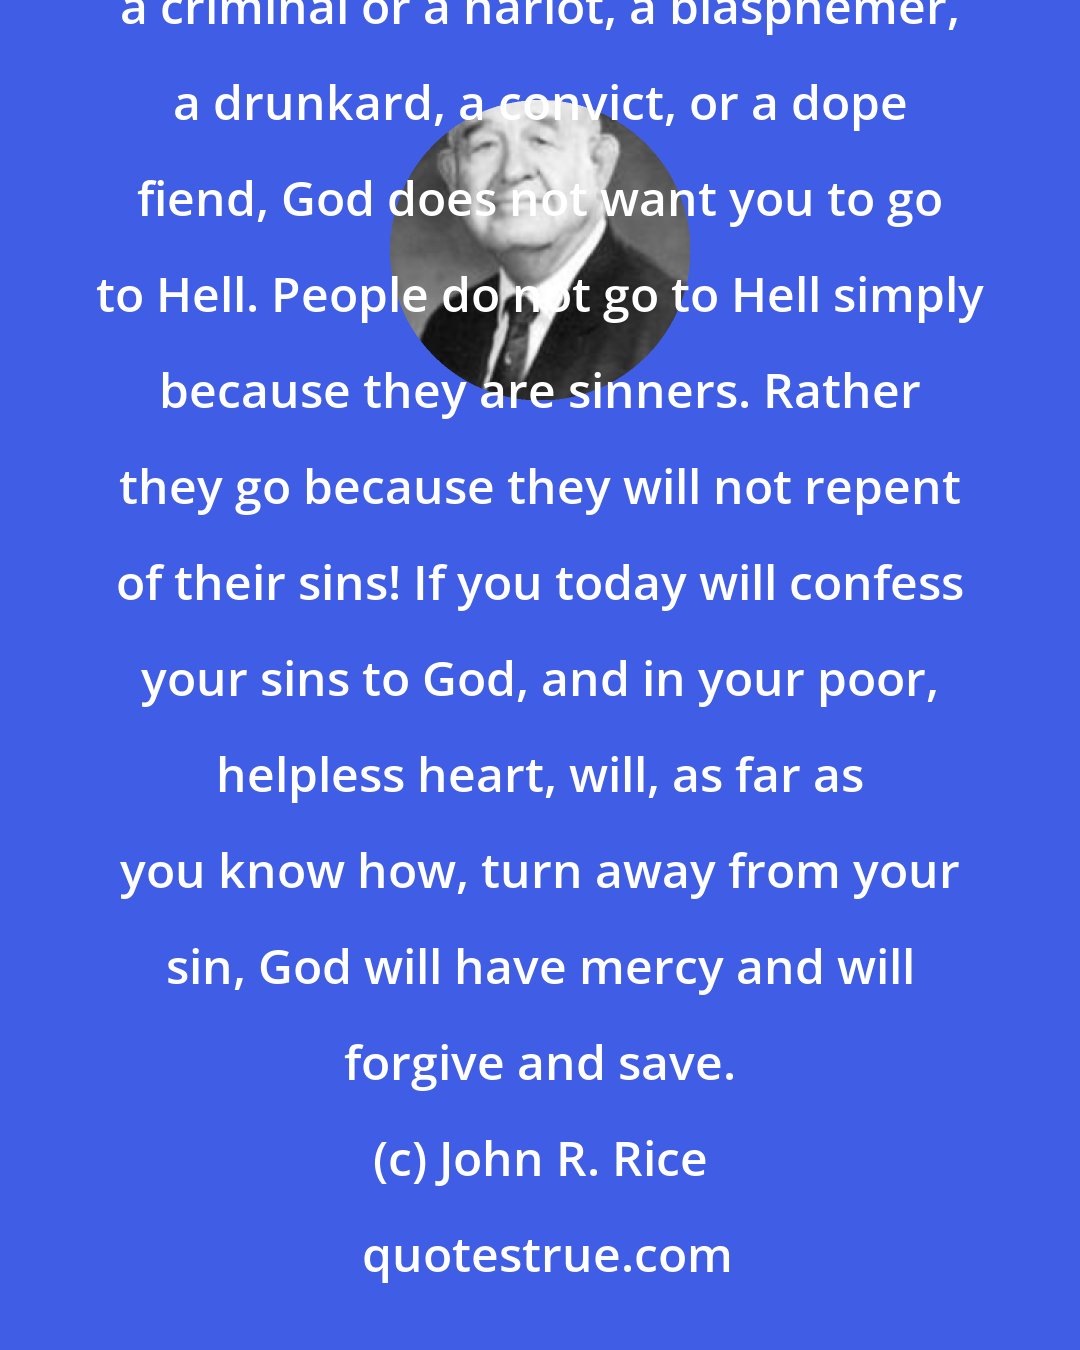 John R. Rice: Dear lost sinner, if you are a wicked sinner, yet you do not have to die and go to Hell forever. If you are a criminal or a harlot, a blasphemer, a drunkard, a convict, or a dope fiend, God does not want you to go to Hell. People do not go to Hell simply because they are sinners. Rather they go because they will not repent of their sins! If you today will confess your sins to God, and in your poor, helpless heart, will, as far as you know how, turn away from your sin, God will have mercy and will forgive and save.